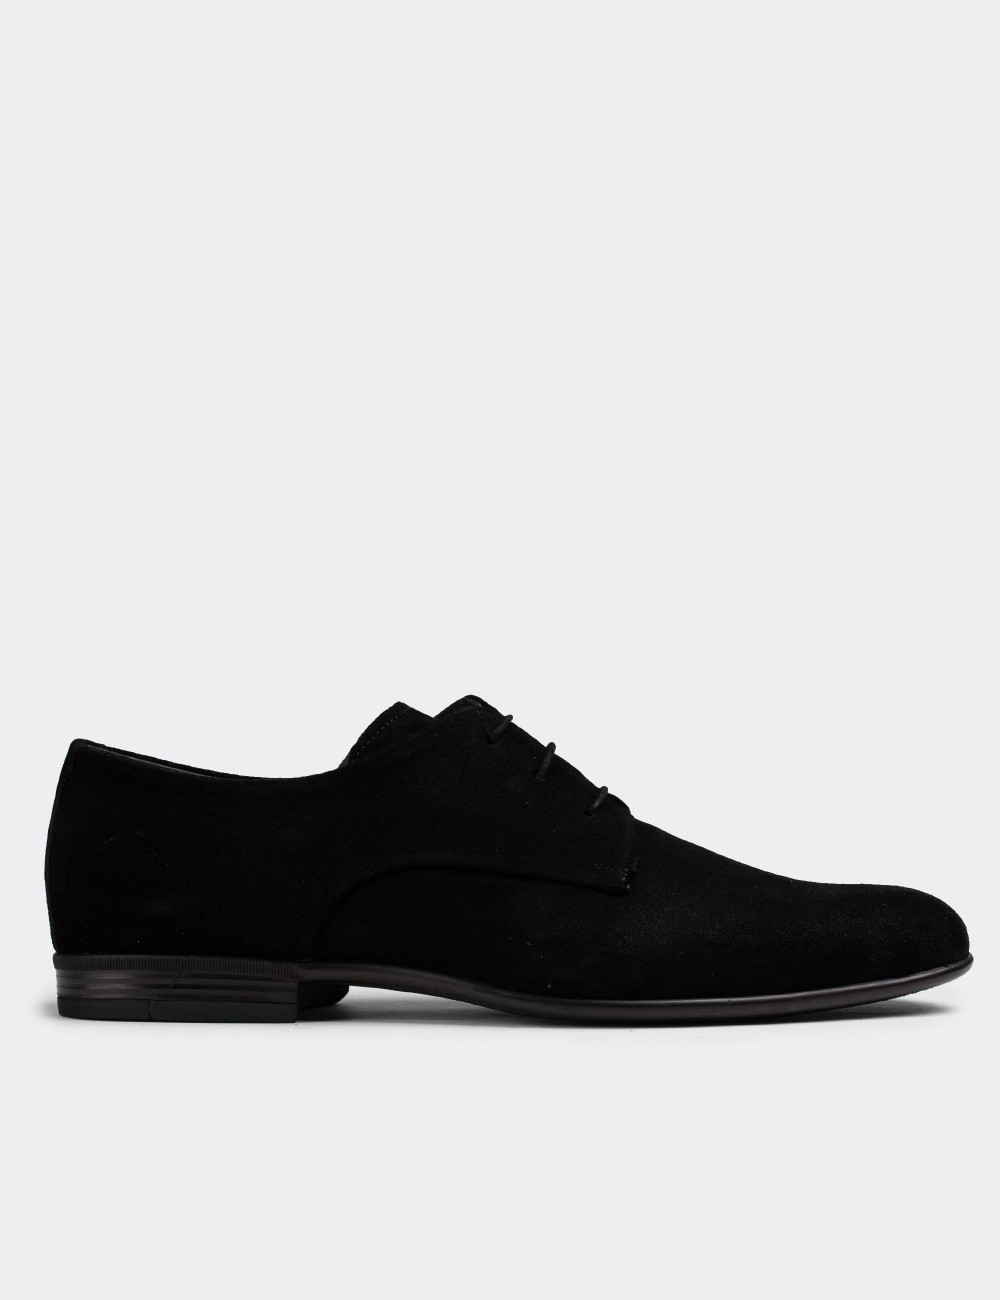 Black Suede Leather Classic Shoes - 01709MSYHC02